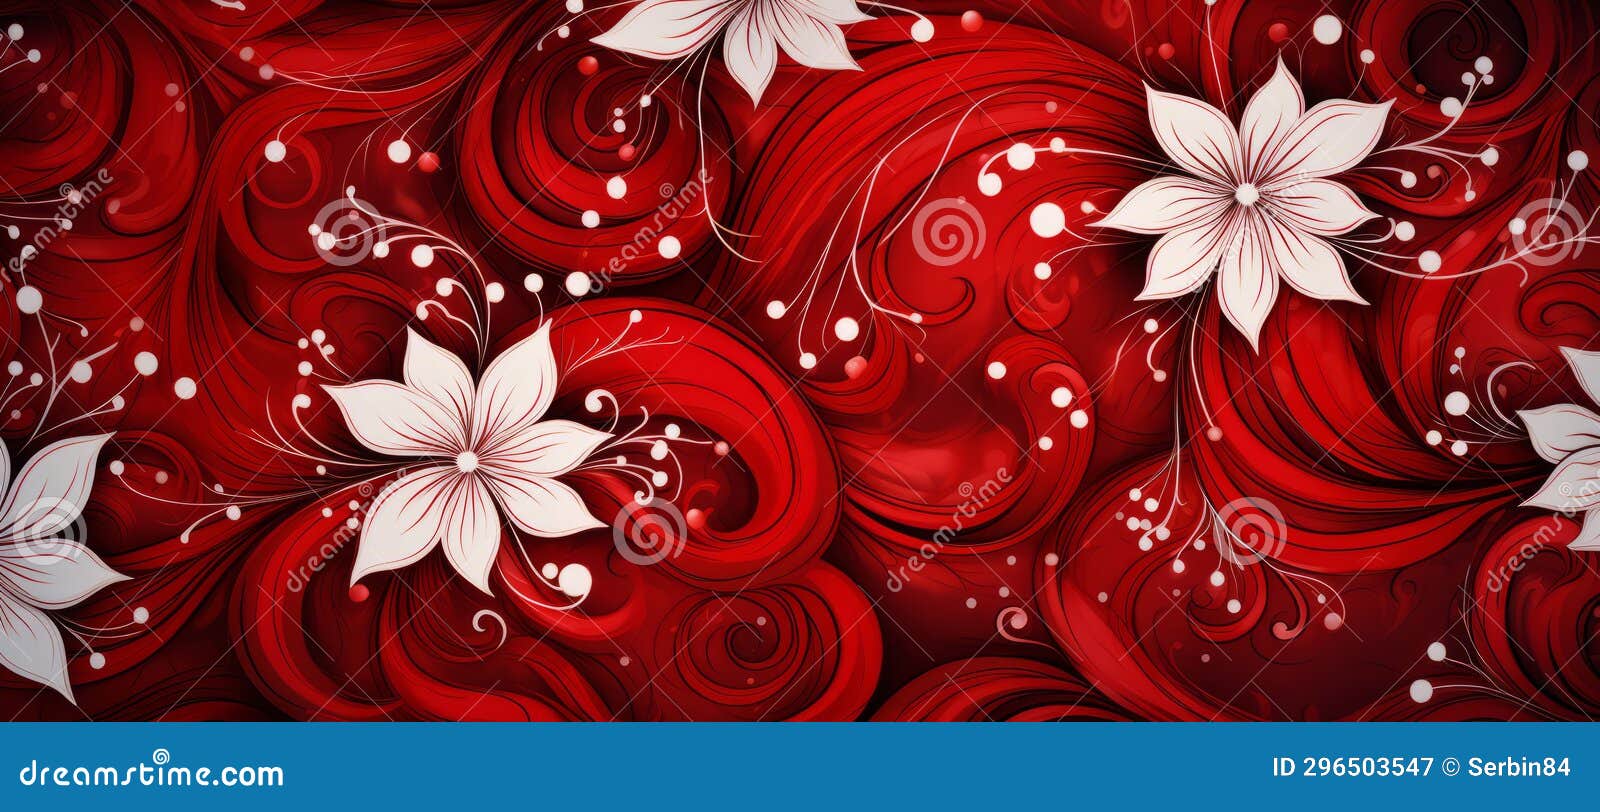 Pattern of Christmas Flowers in Red and White Colors Illustration ...